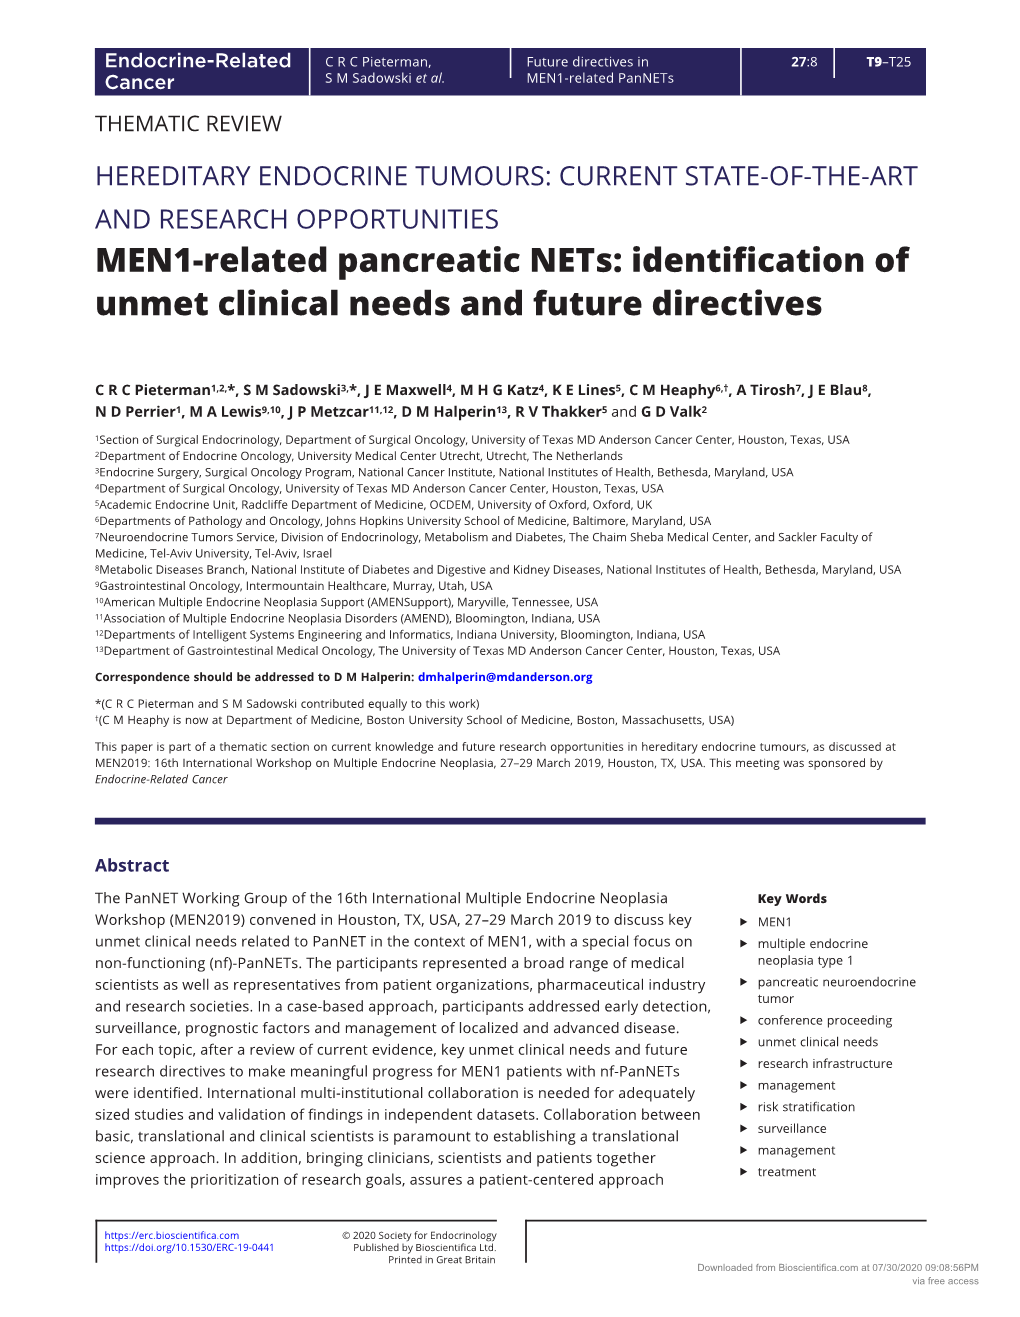 MEN1-Related Pancreatic Nets: Identification of Unmet Clinical